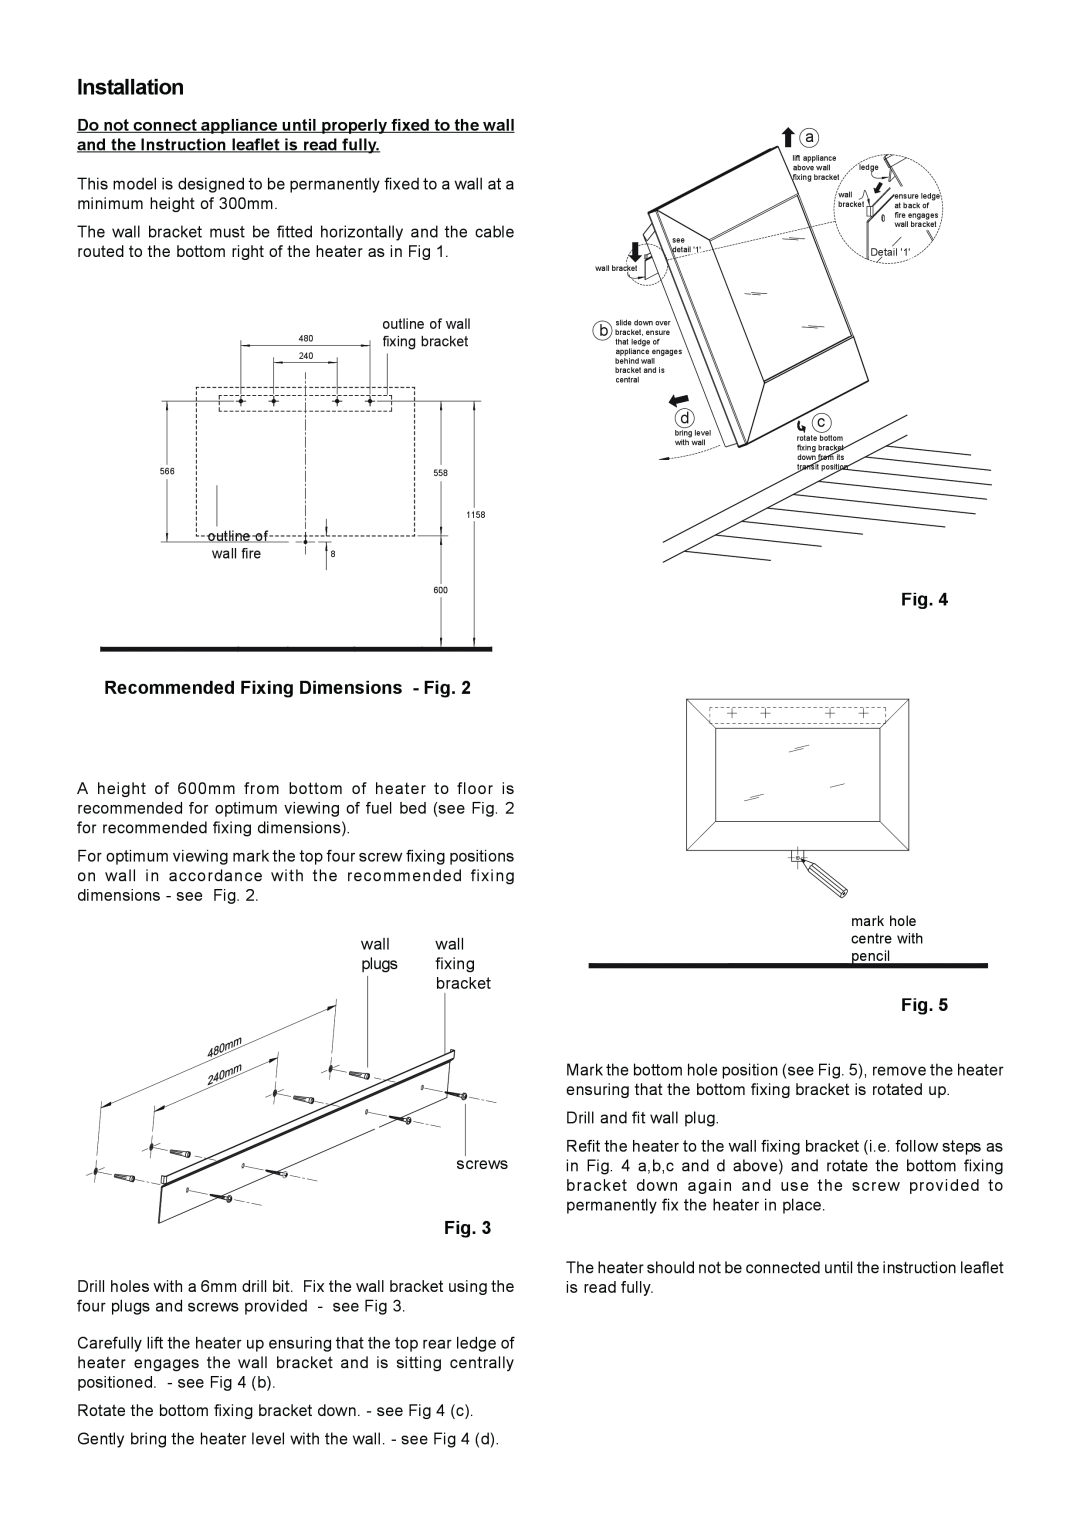 Dimplex SP420 dimensions Installation, Recommended Fixing Dimensions - Fig 